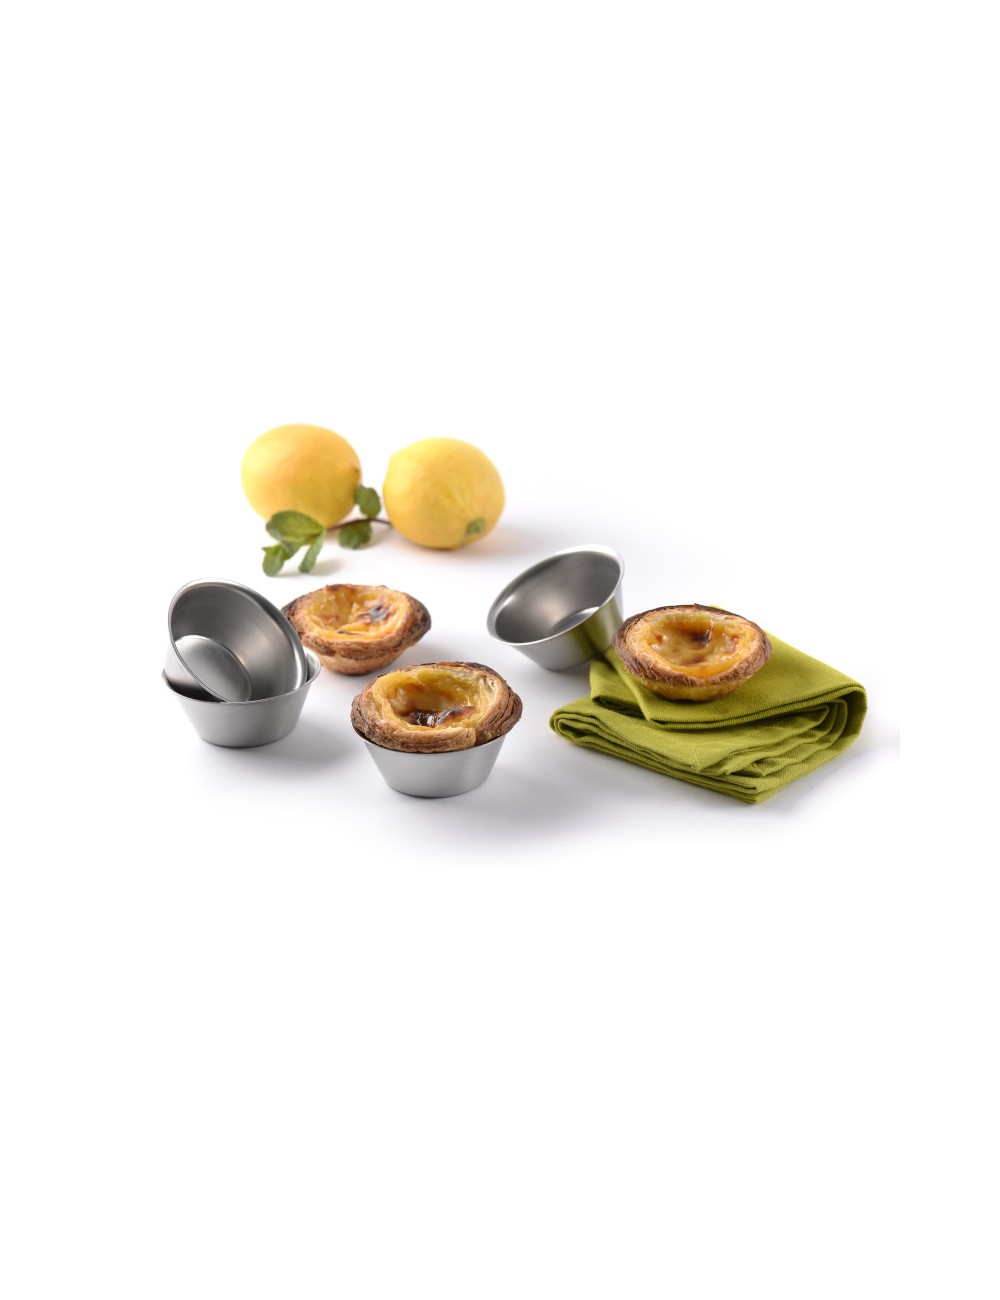 PASTEIS DE NATA MOULD - STAINLESS STEEL